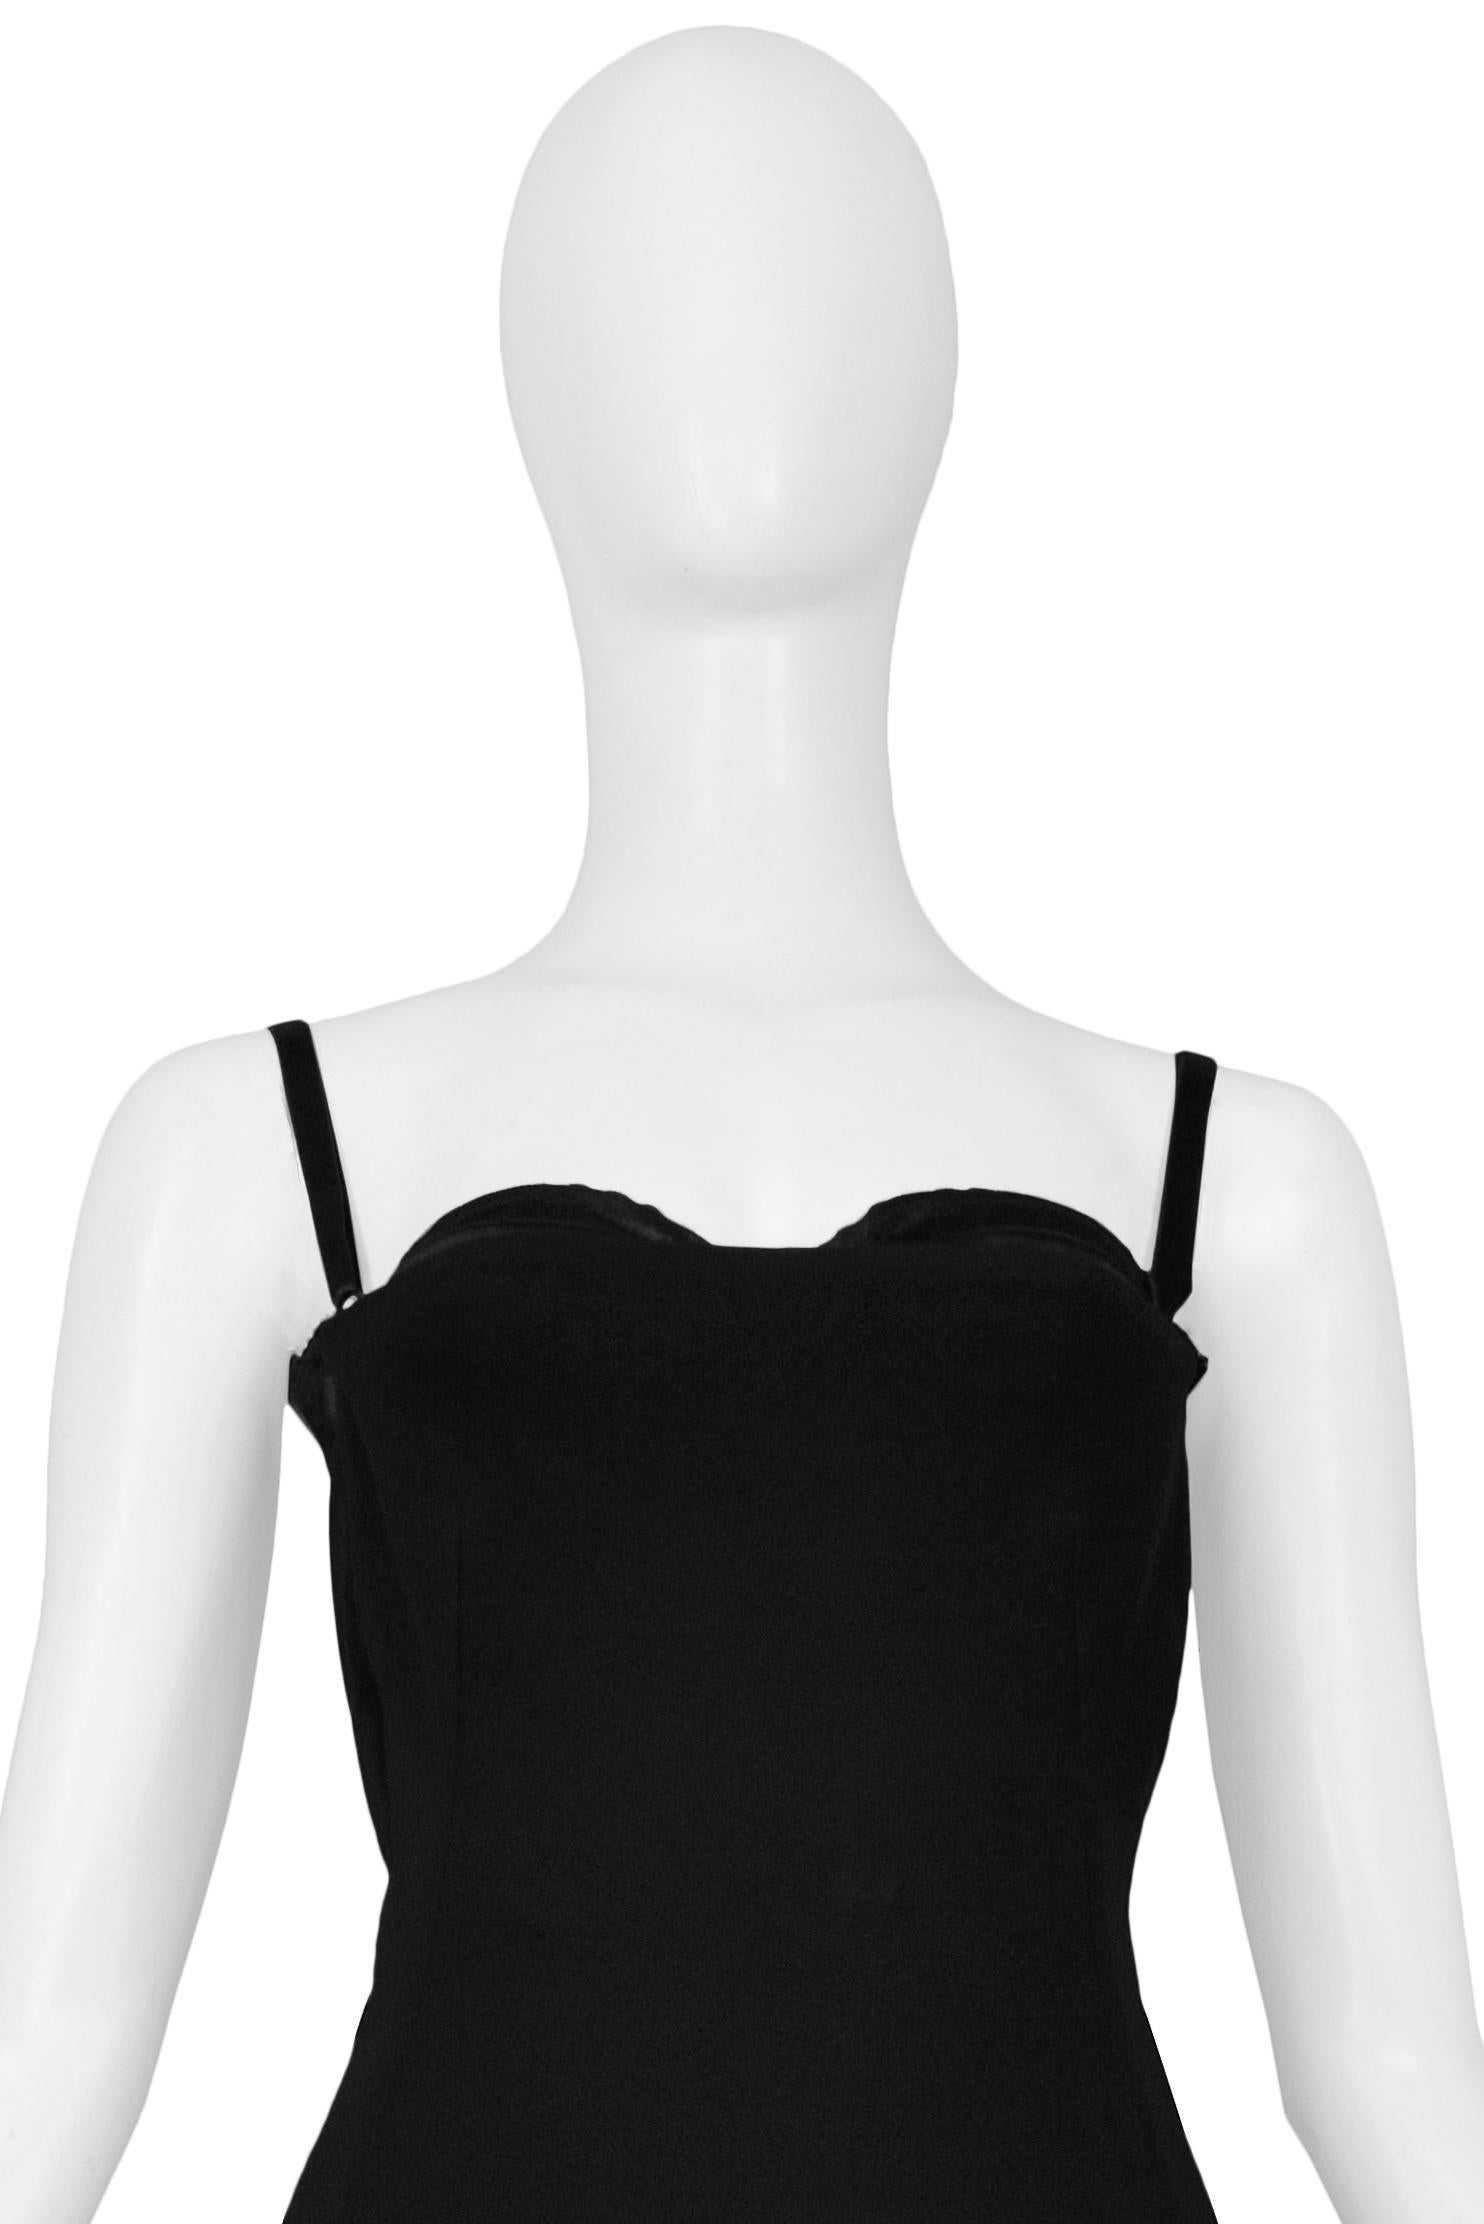 Resurrection Vintage is excited to offer a vintage Dolce & Gabbana black jersey cocktail dress with an open back and multiple straps, an exposed interior bra with adjustable straps, and a center back skirt zipper. 

Dolce & Gabbana
Size: